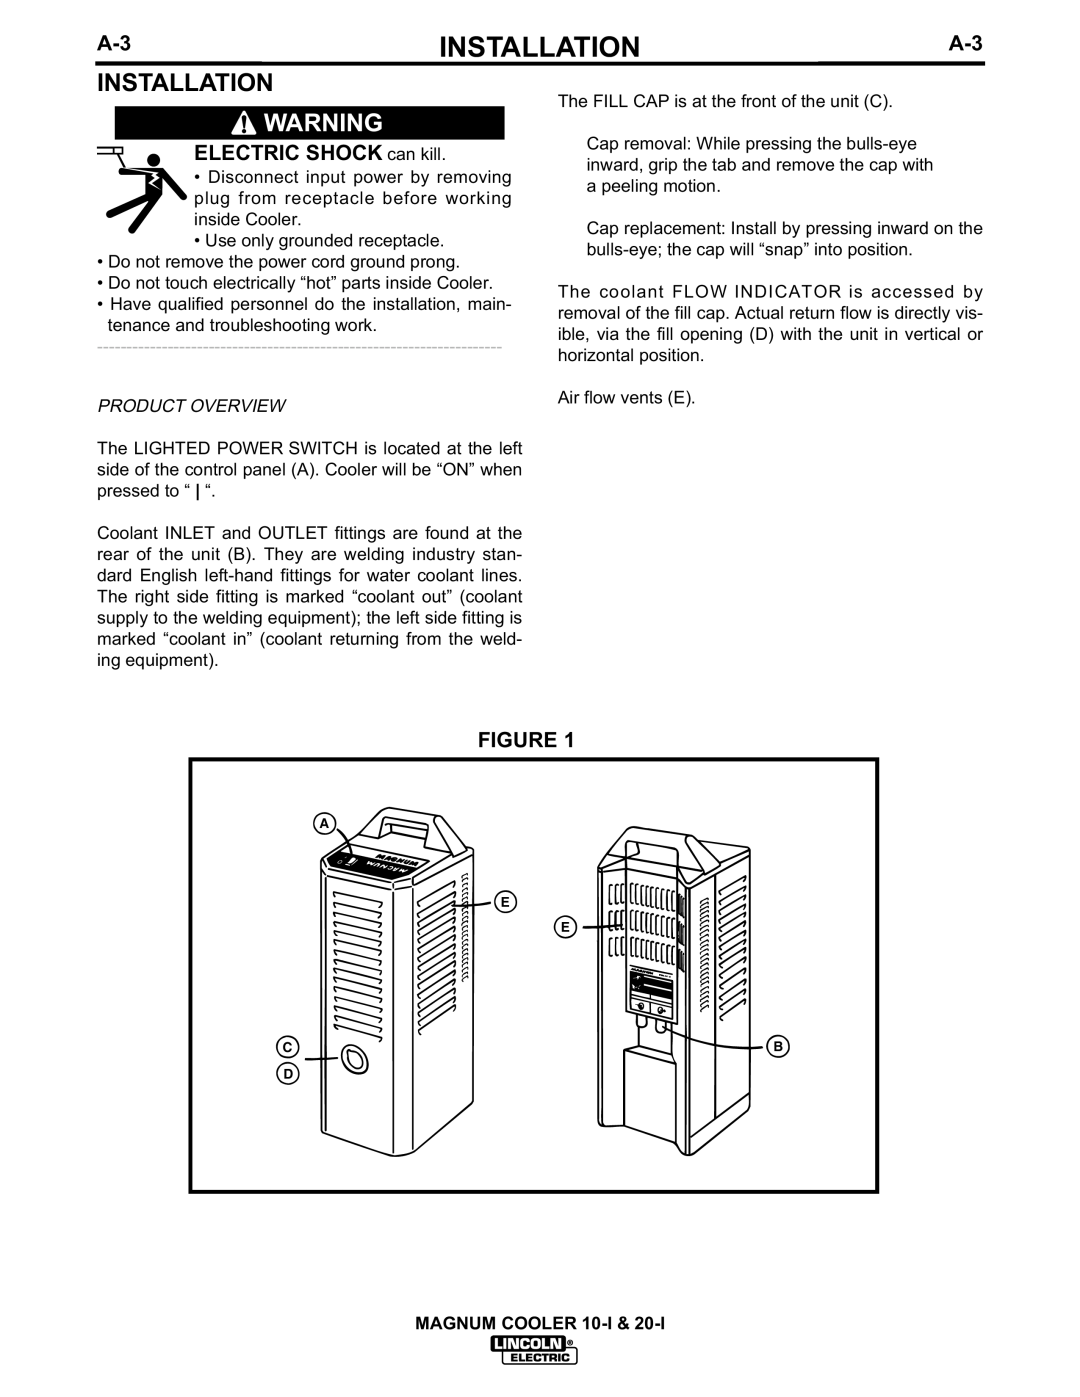 Lincoln Electric IM438-B manual Installation, ELECTRIC SHOCK can kill, Magnum Cooler 